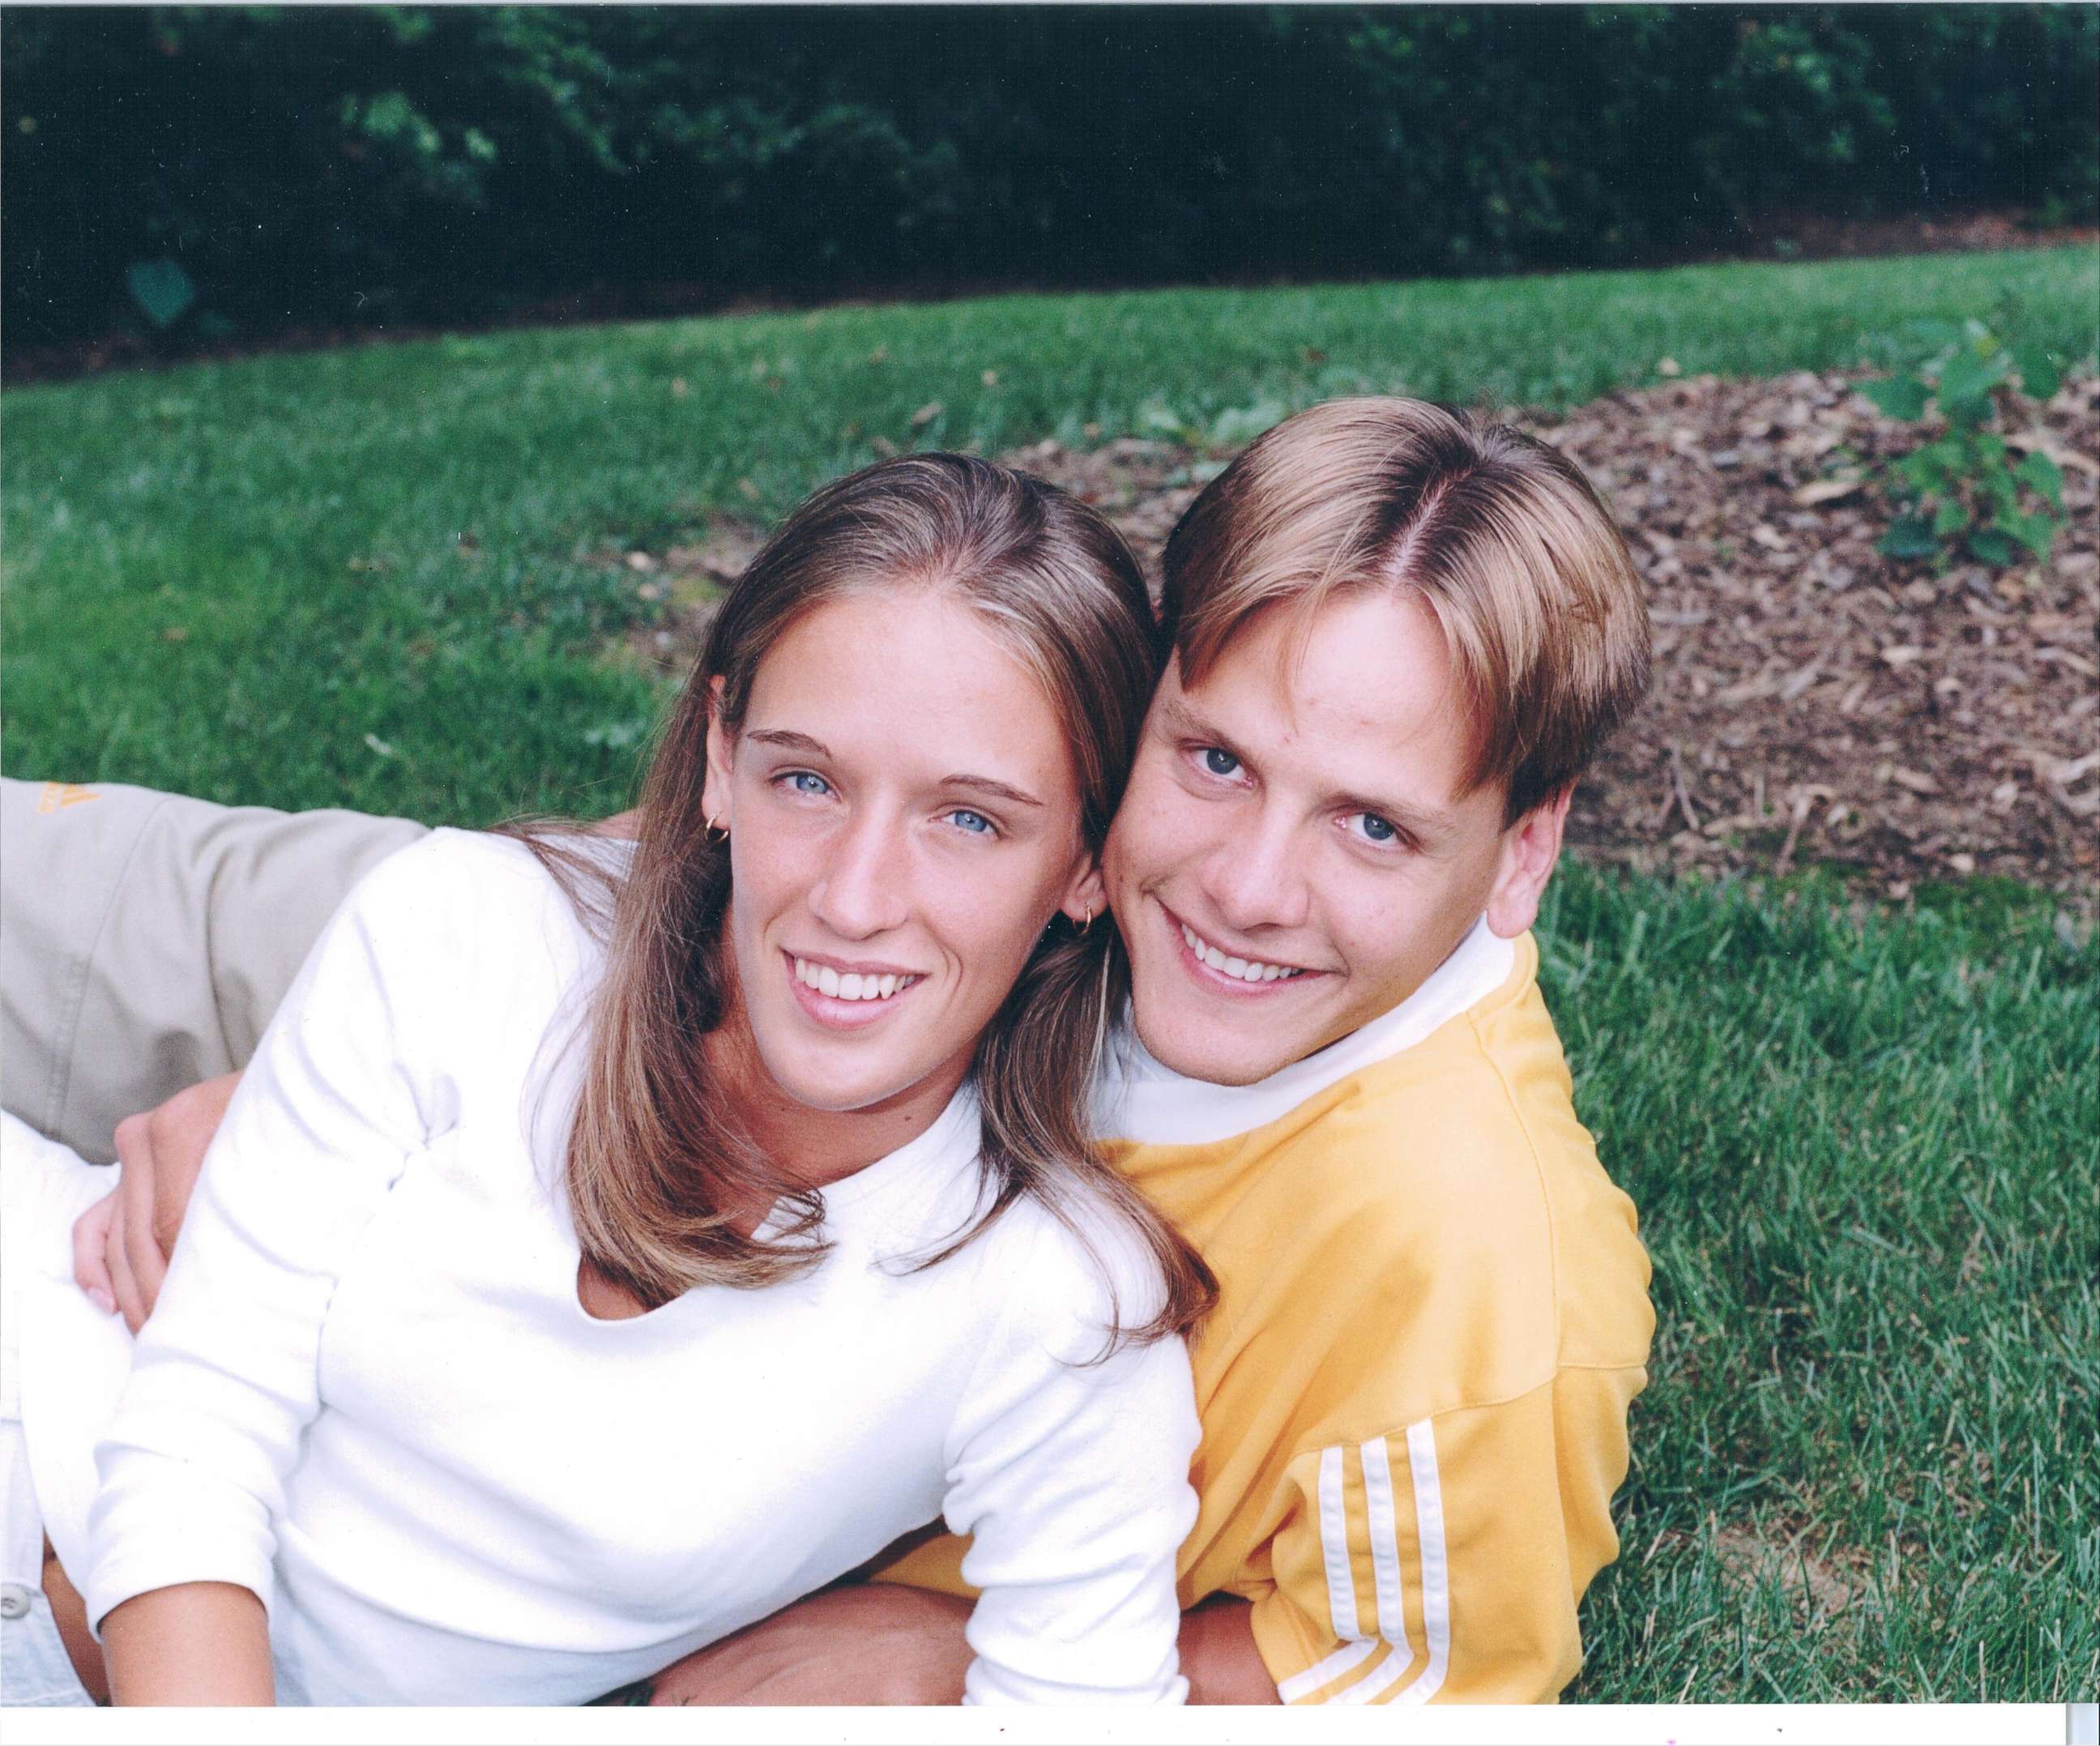 Janet and Raven Abaroa were married in August 2000, two years after they met.